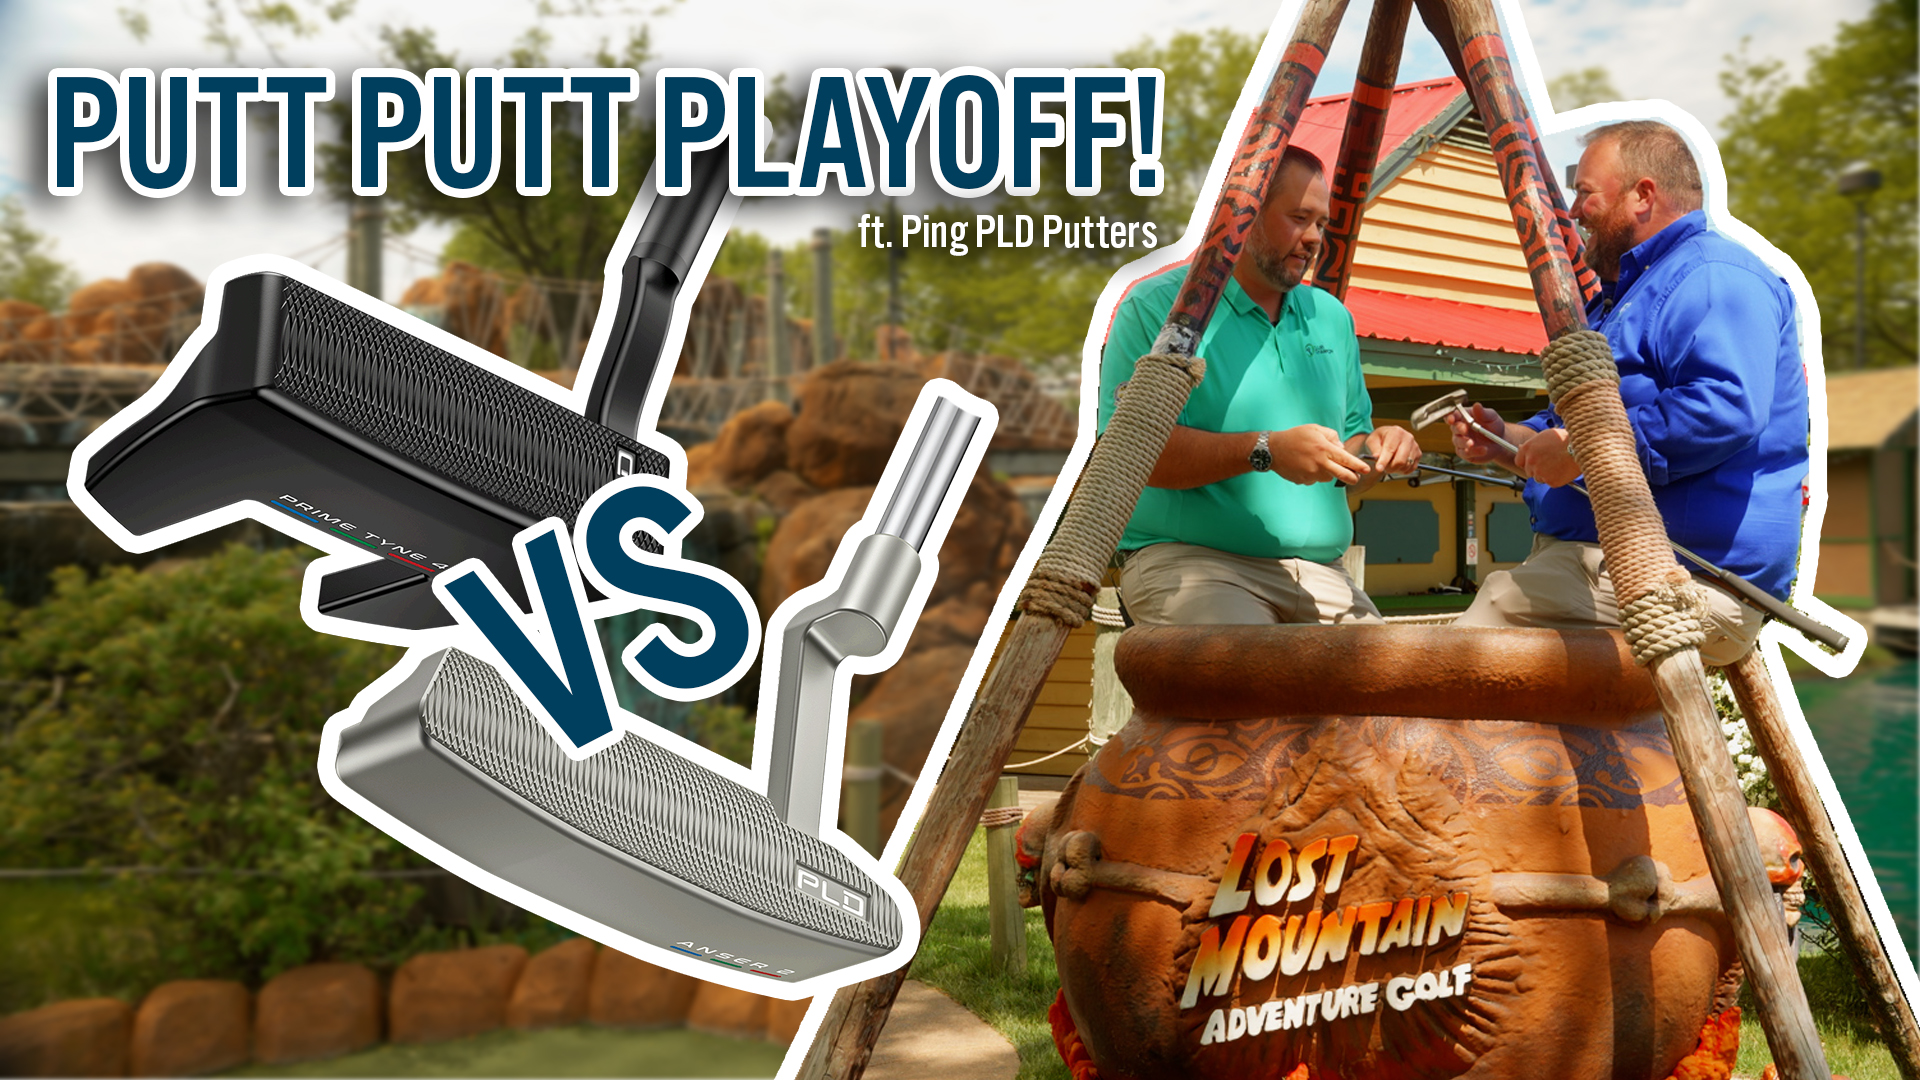 Putt Putt Playoff with the Ping PLD Putter